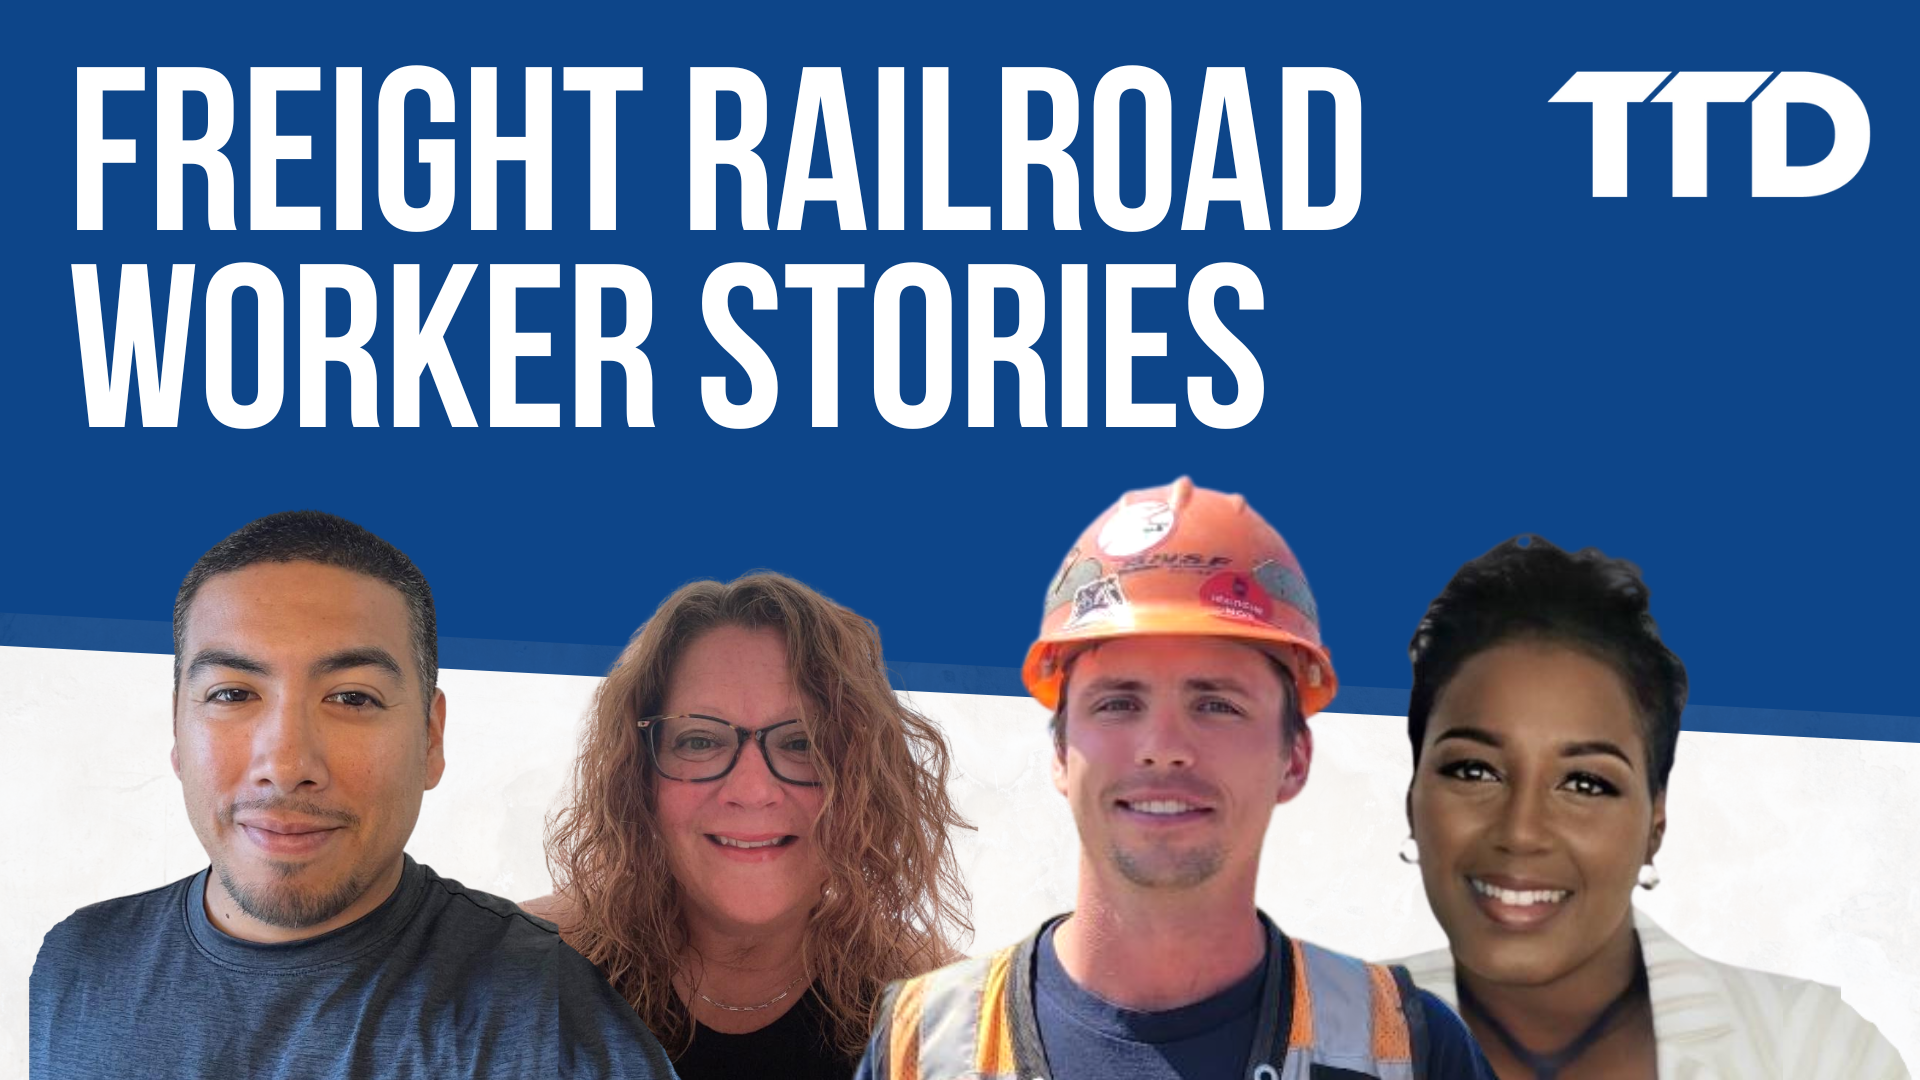 Freight Railroad Worker Stories